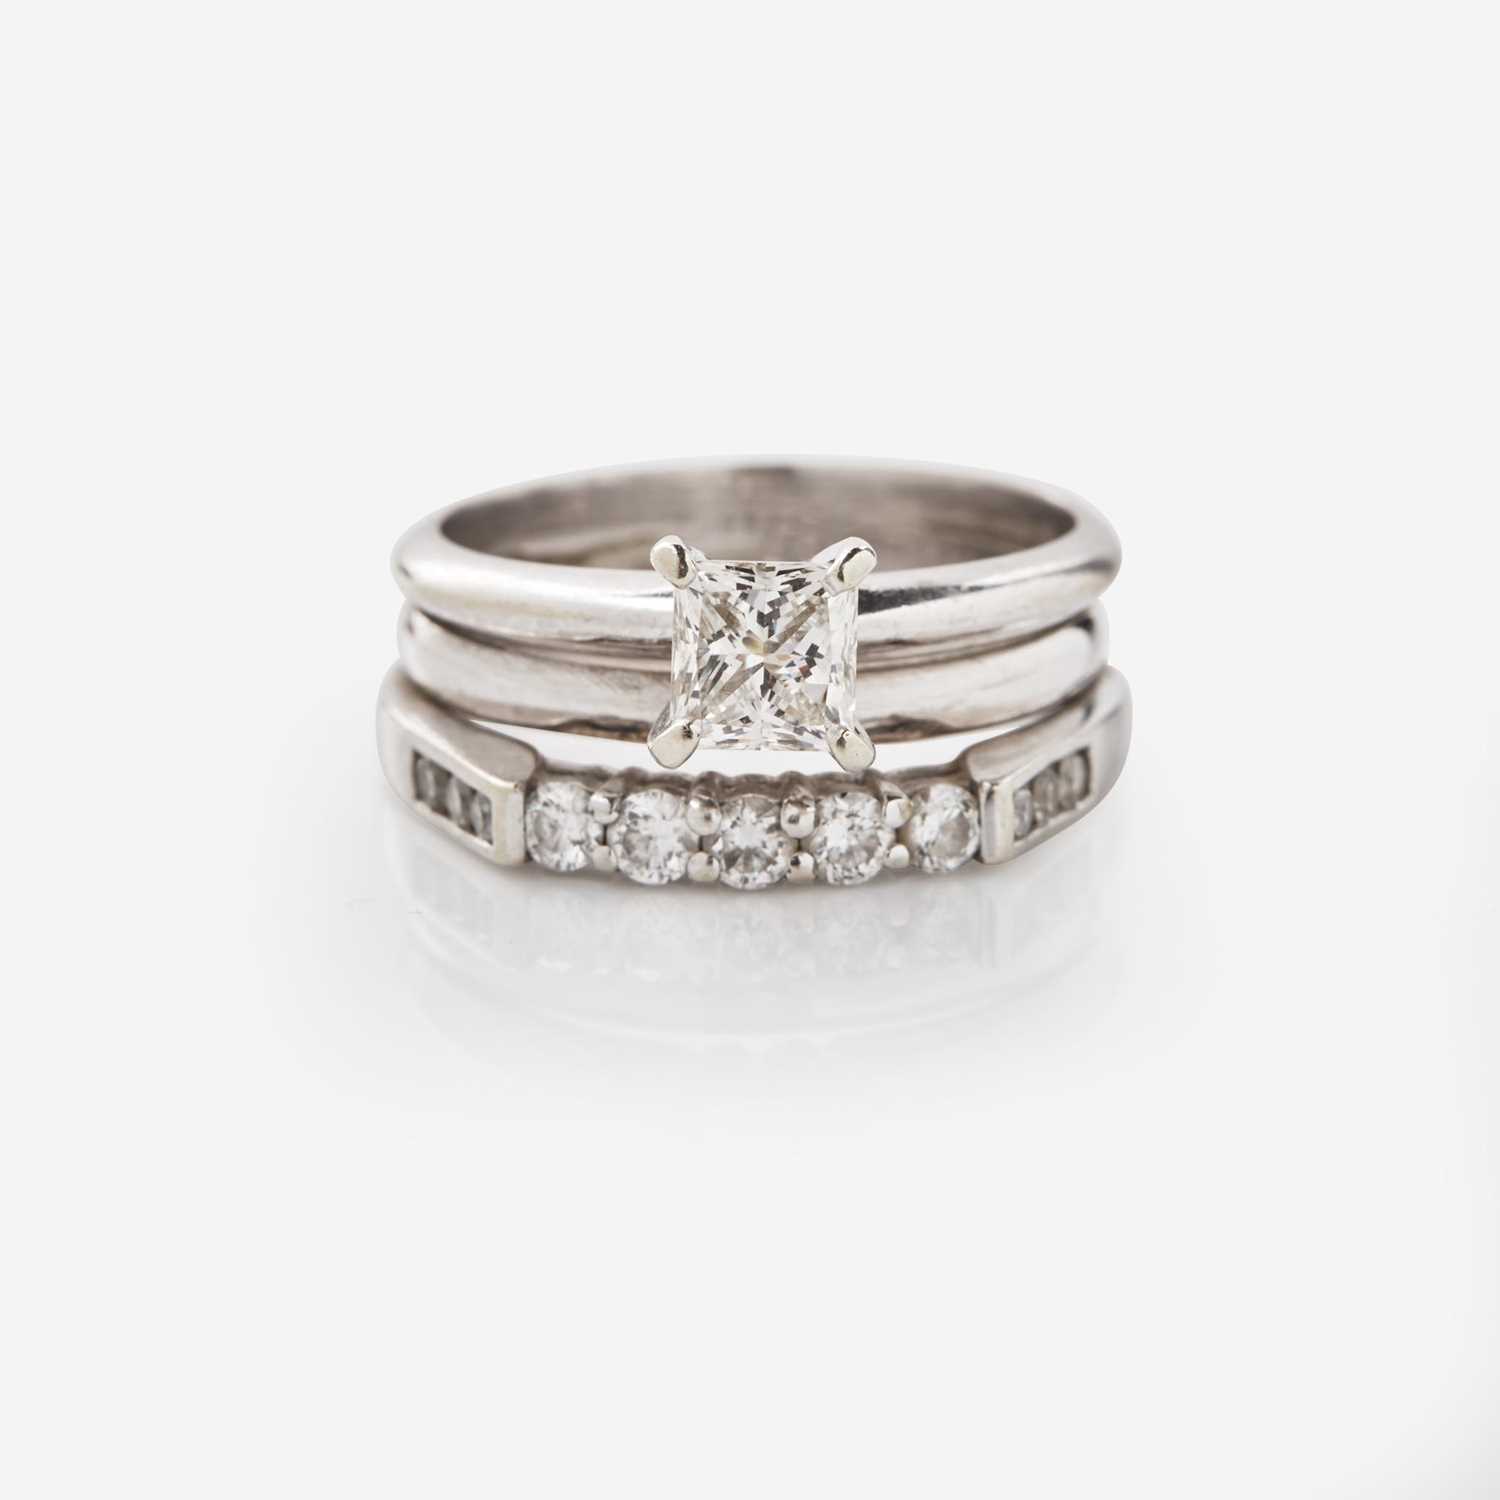 Lot 46 - A 14K White Gold and Diamond Ring